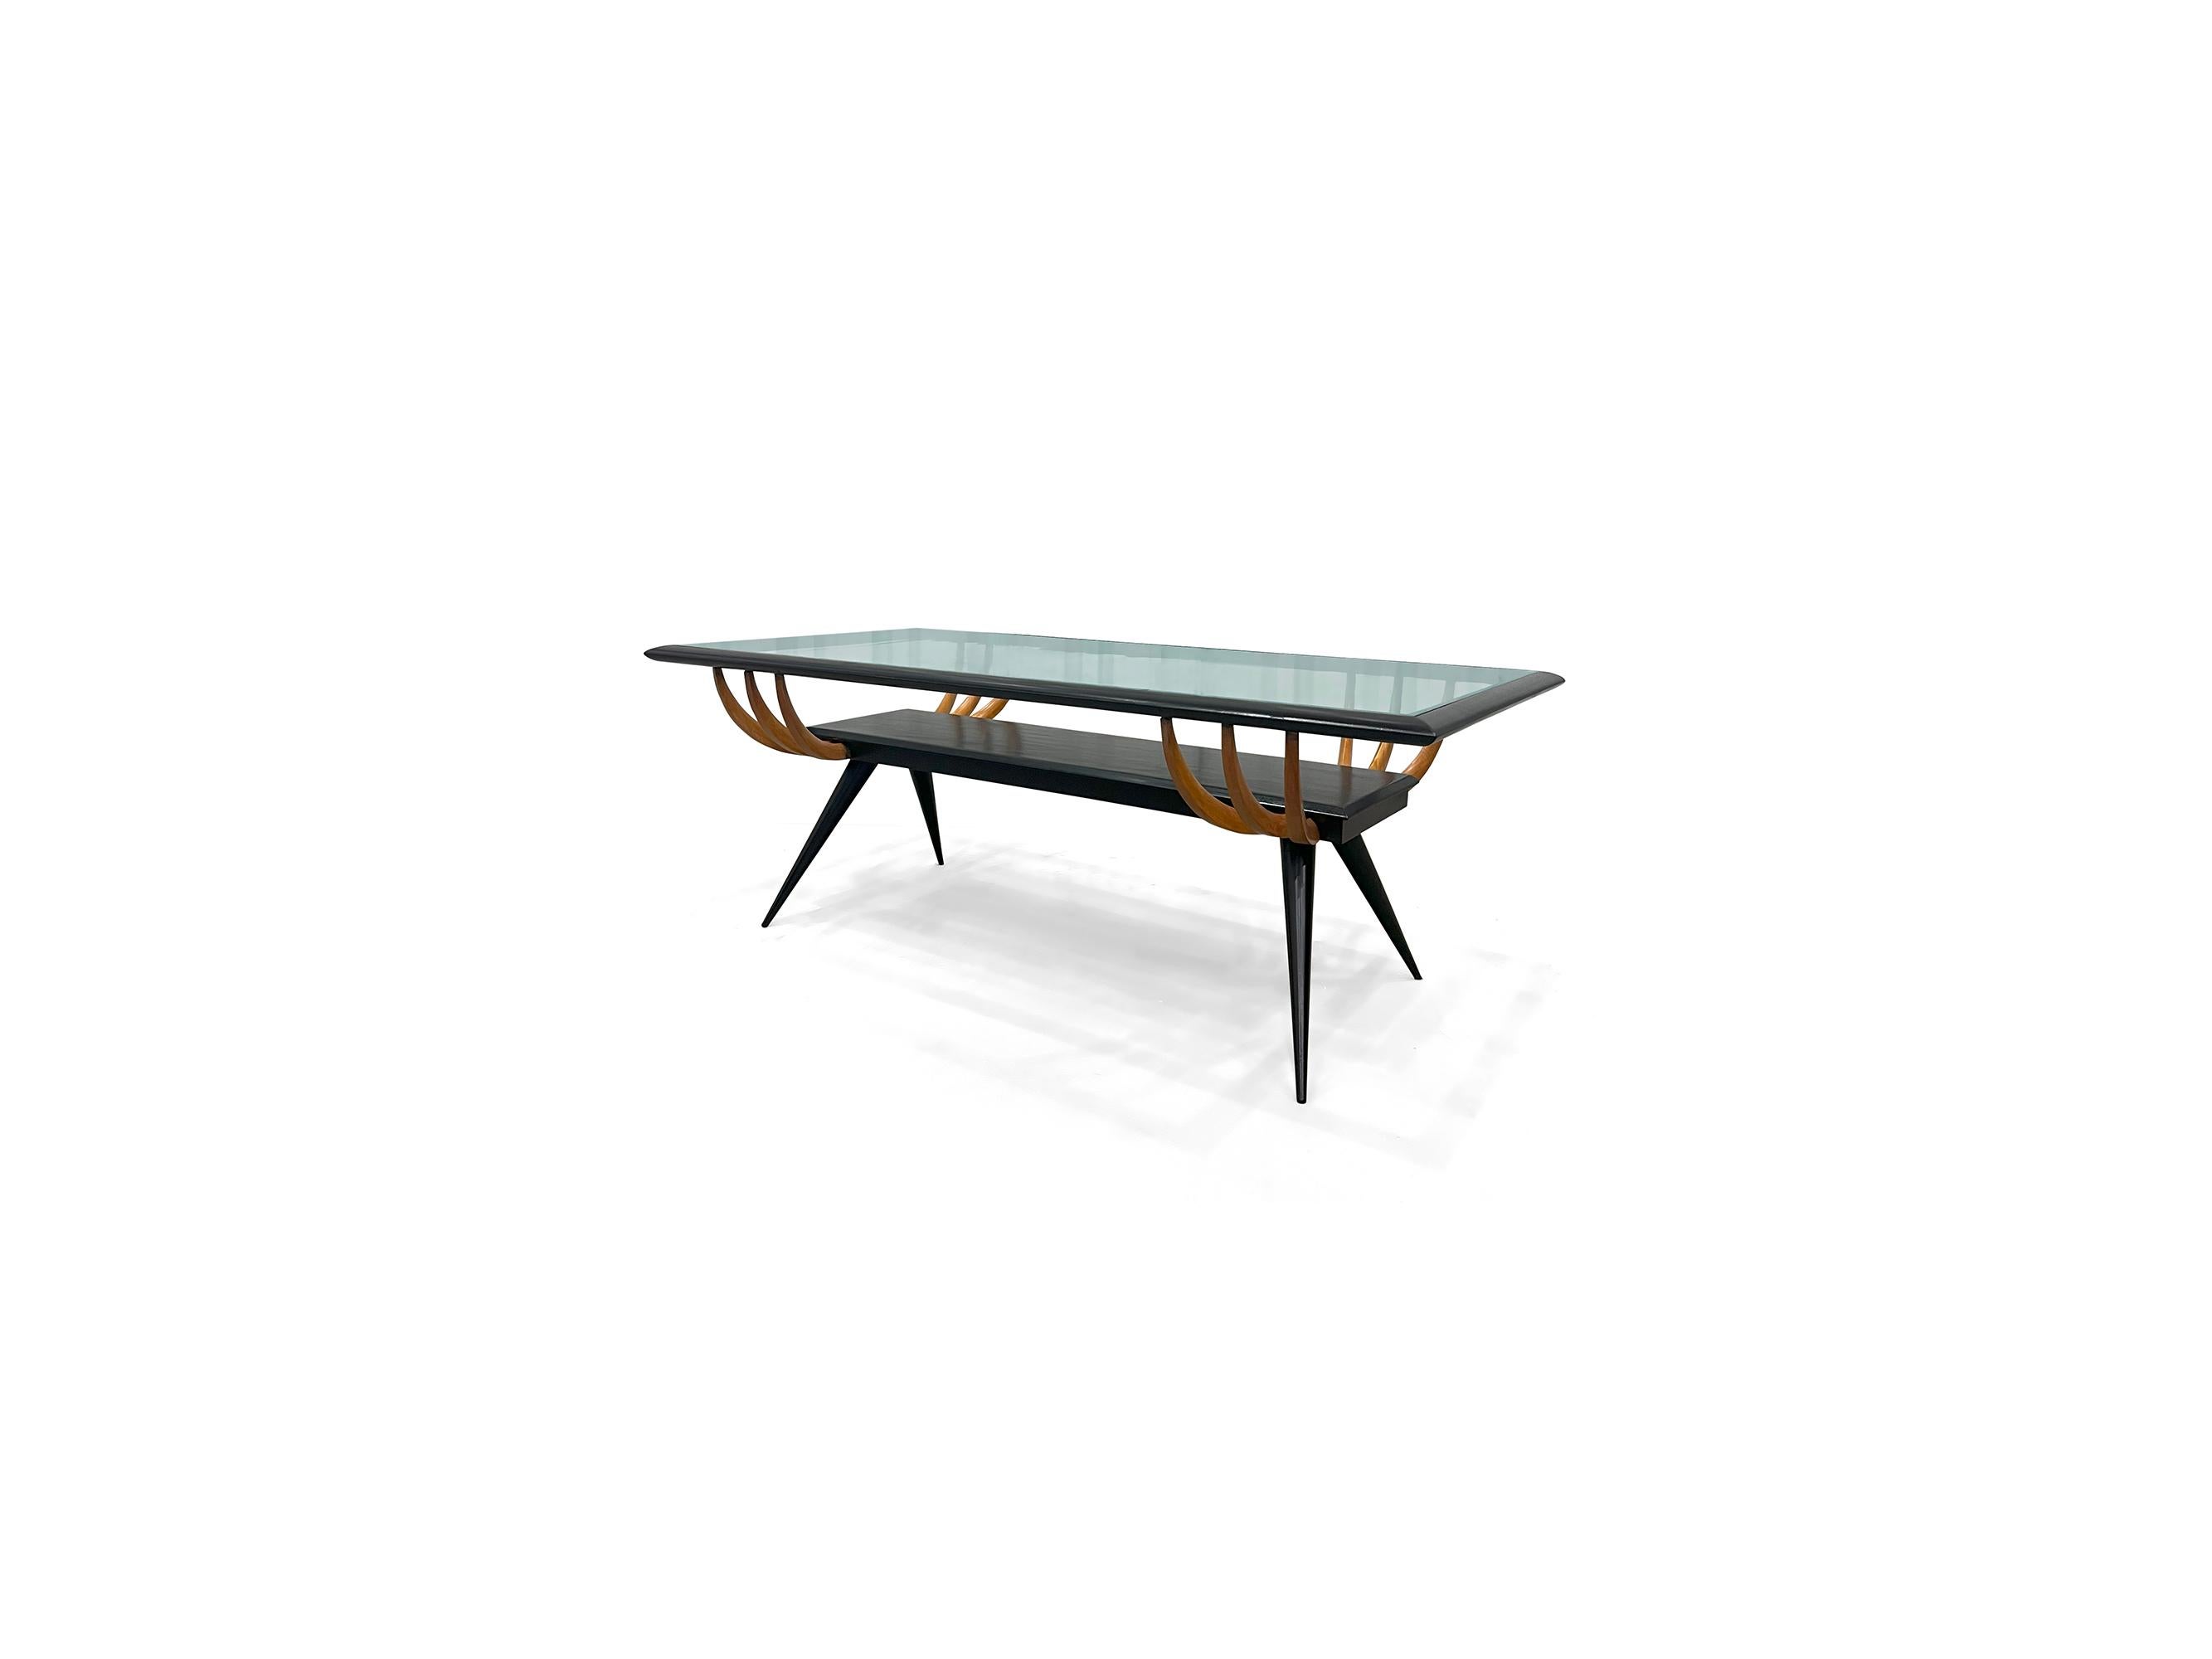 Available in NYC with free domestic shipping included, this Brazilian Modern coffee table in two-tone hardwood and glass by Giuseppe Scapinelli, 1950s is nothing less than spectacular.

This Brazilian mid-century beauty was designed by Giuseppe